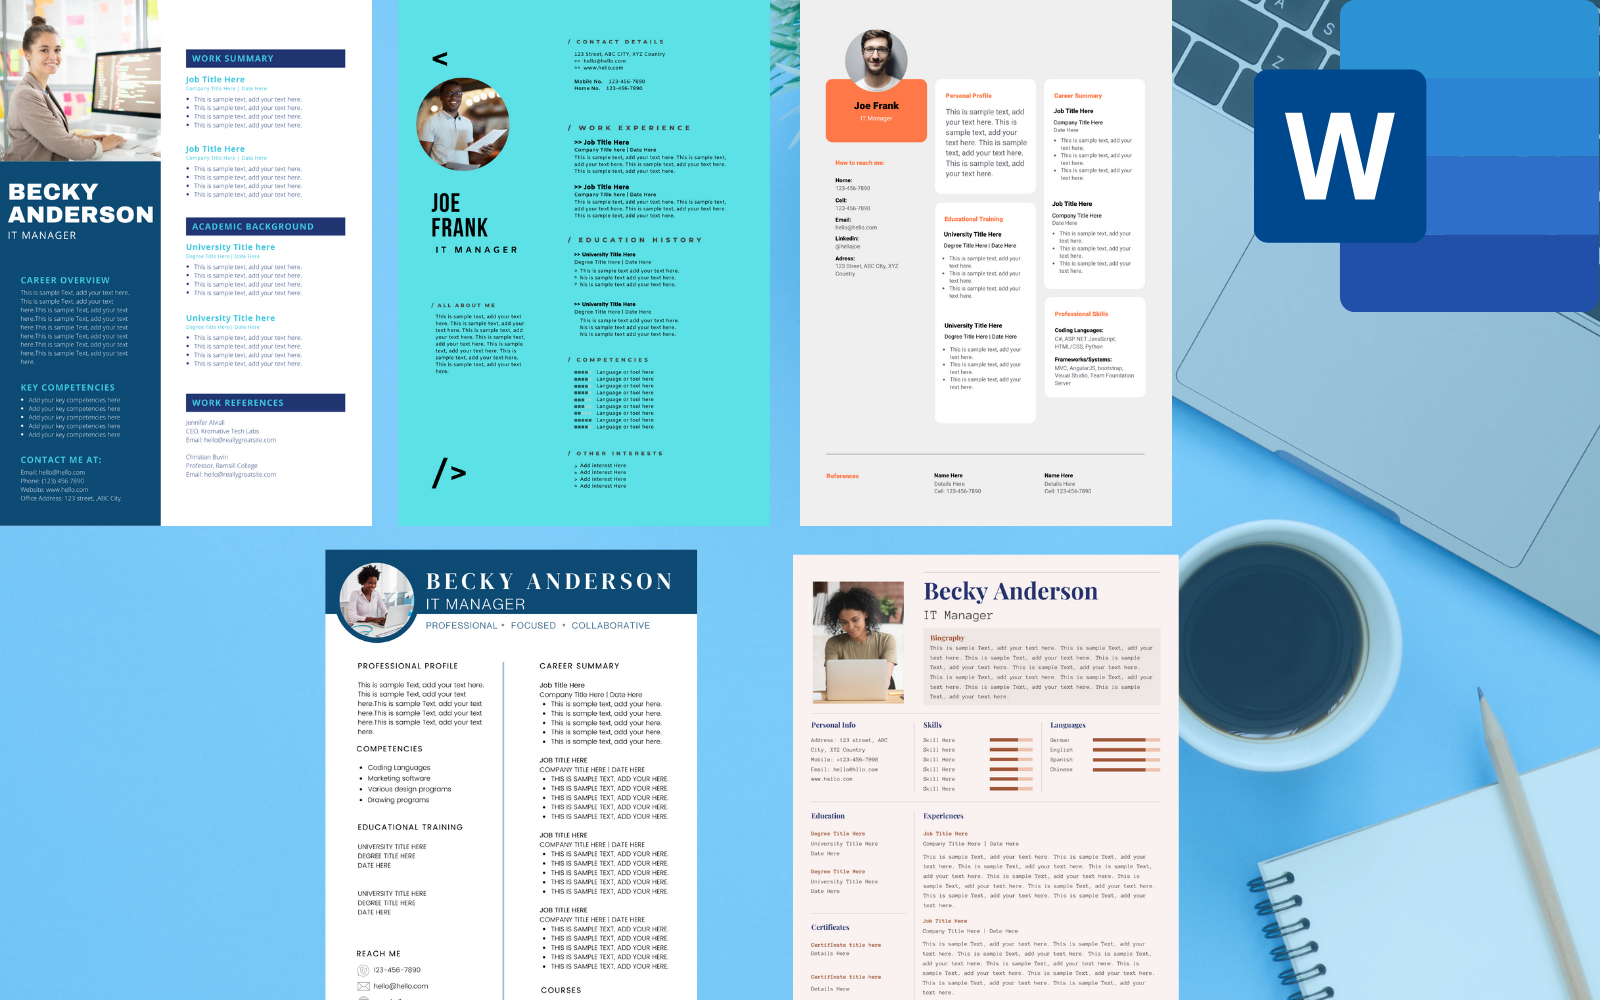 Pack of 5 IT Software Project Manager Resume Templates for MS Word